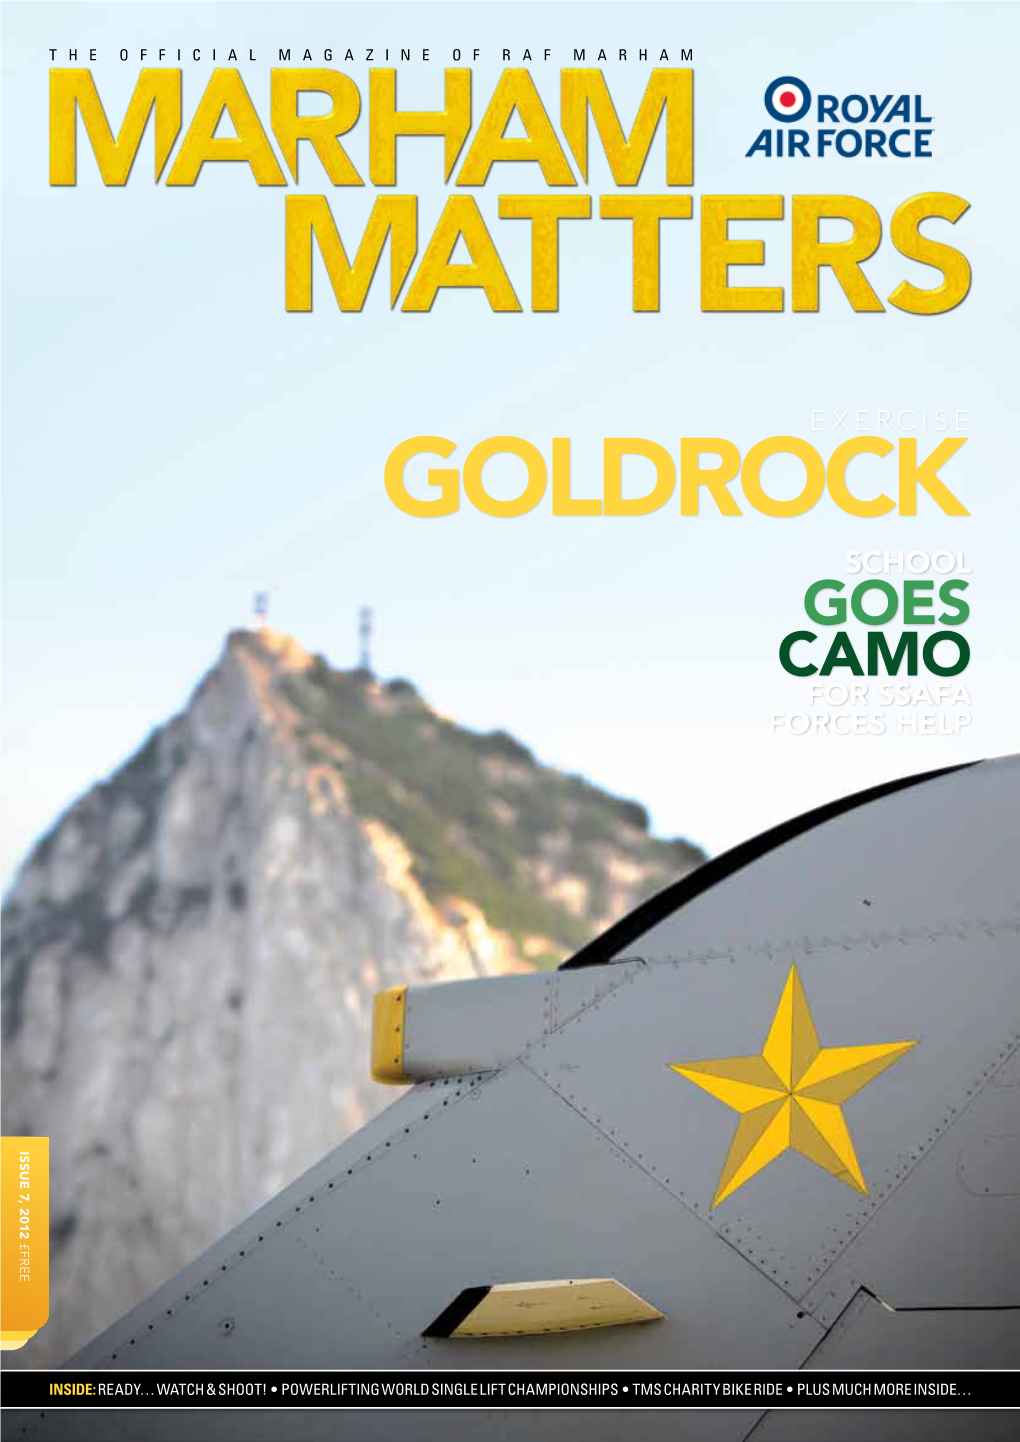 GOLDROCK SCHOOL GOES CAMO for SSAFA FORCES HELP Issue 7,Issue 2012 £ FREE